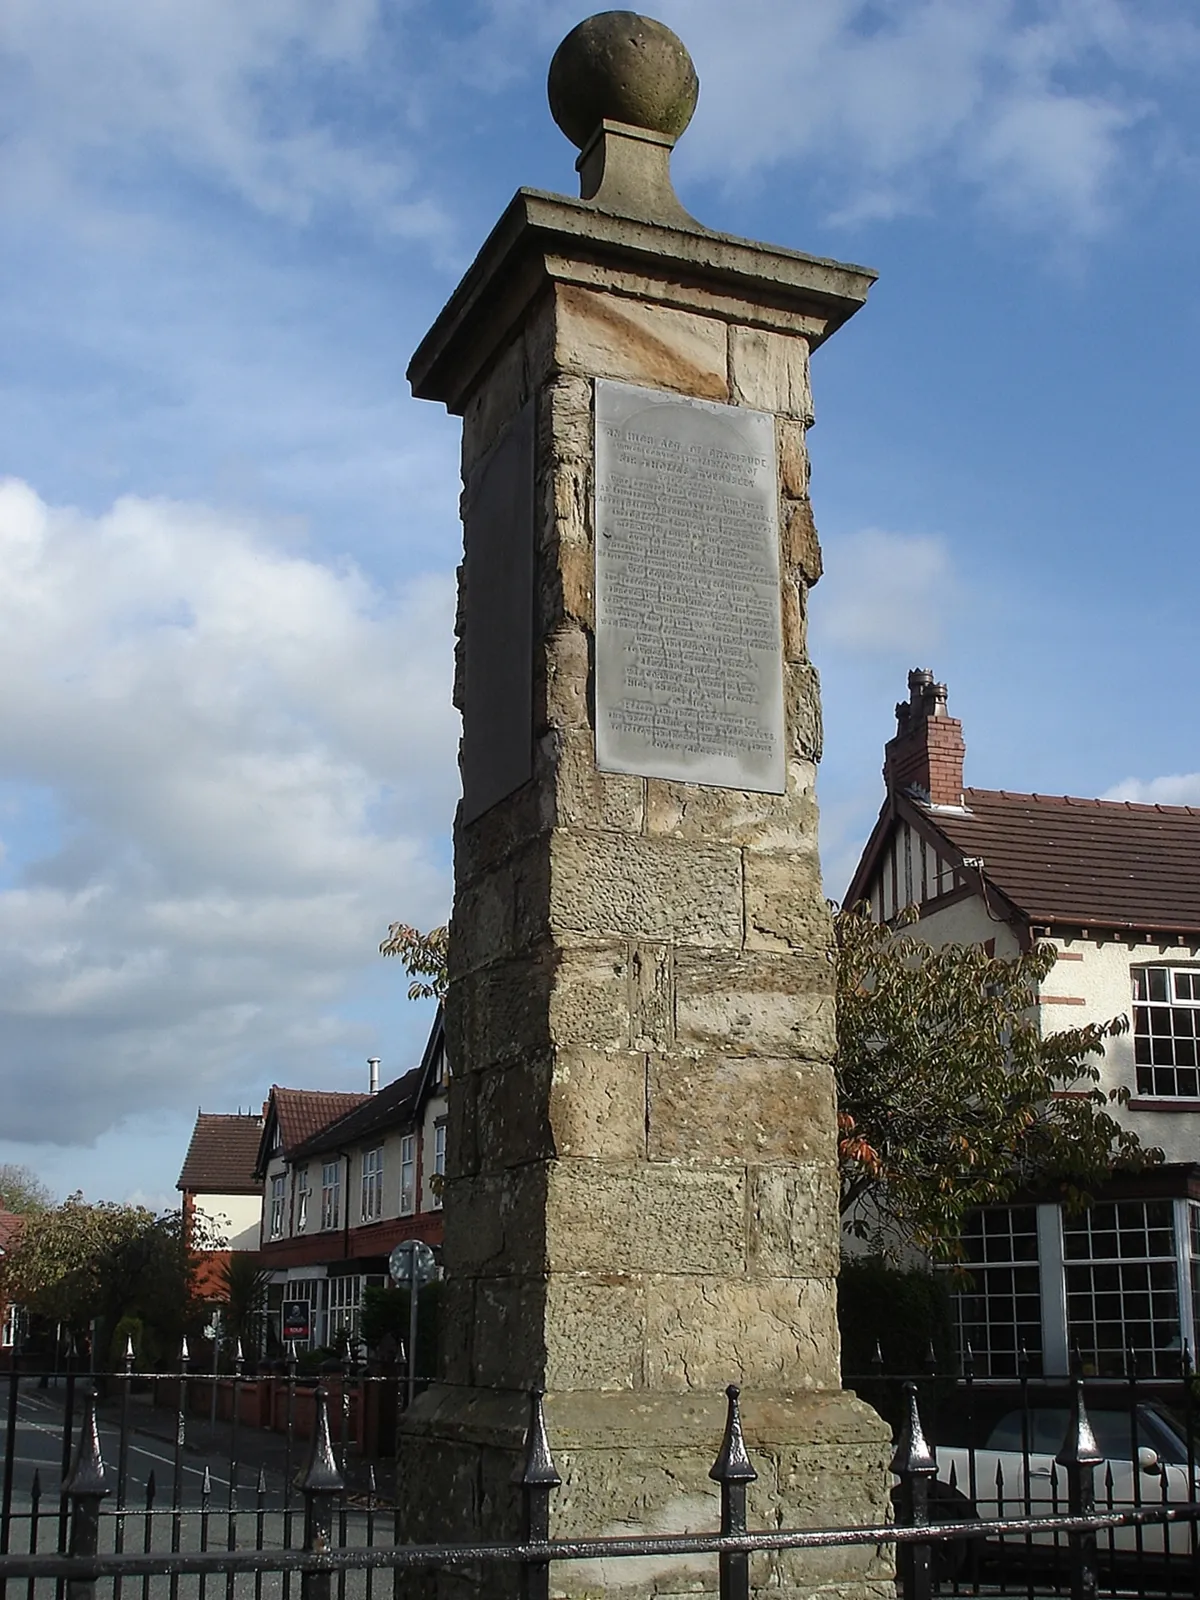 Photo showing: Monument to Sir Thomas Tyldesley, Royalist commander killed at the Battle of Wigan Lane, 25 August 1651. Erected by Alexander Rigby, High Sheriff of Lancashire.